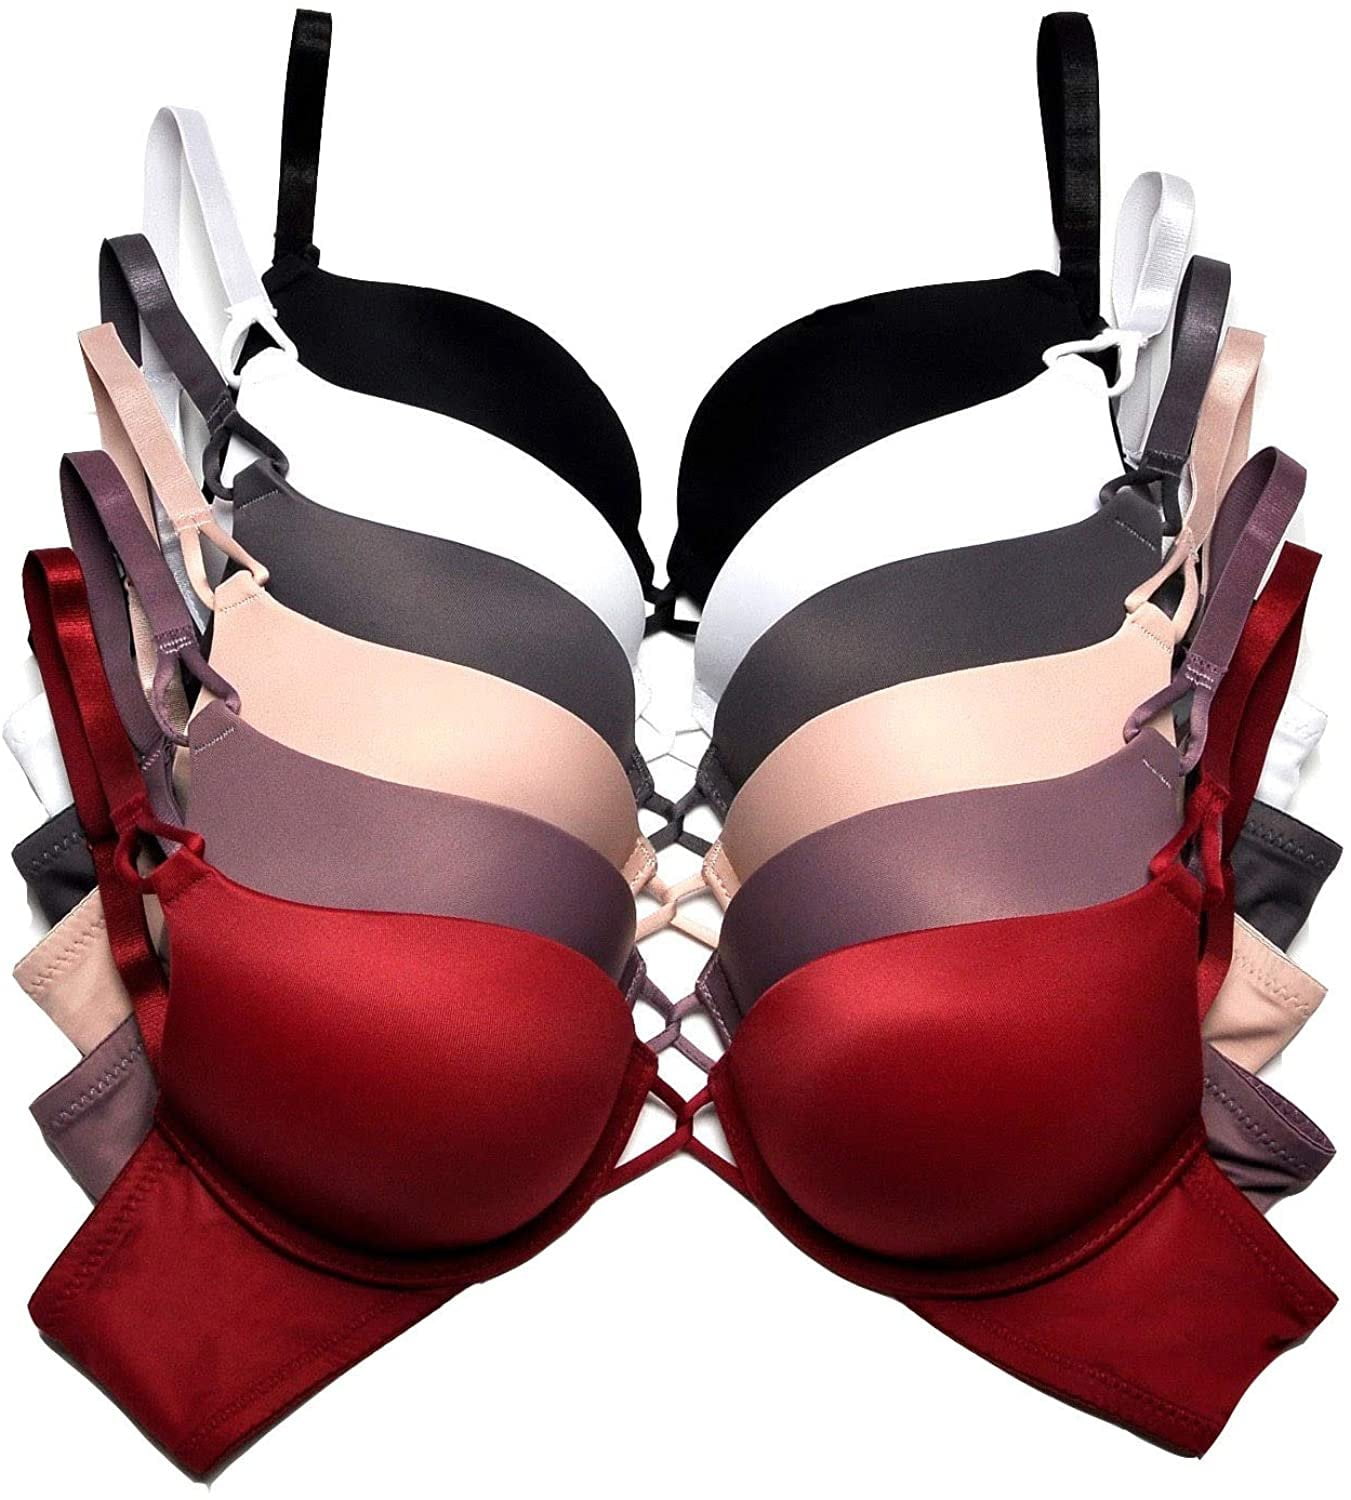 6 Packs Add 2 Cup Maximum Lift Boost Cup Double Push Up Bra Bc 32b 